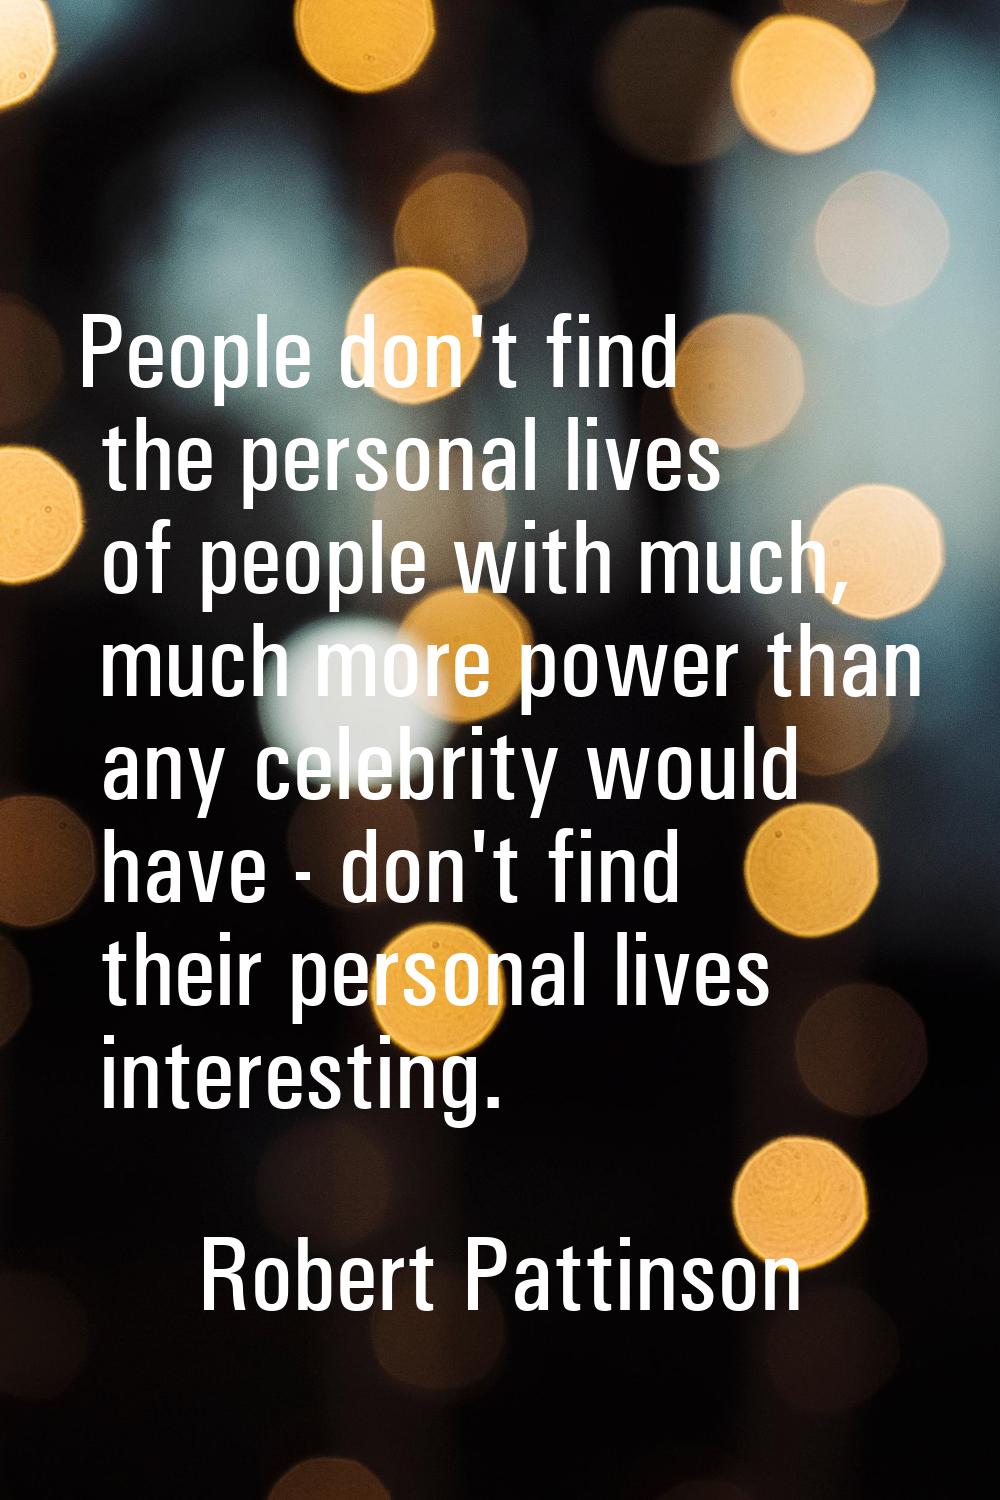 People don't find the personal lives of people with much, much more power than any celebrity would 